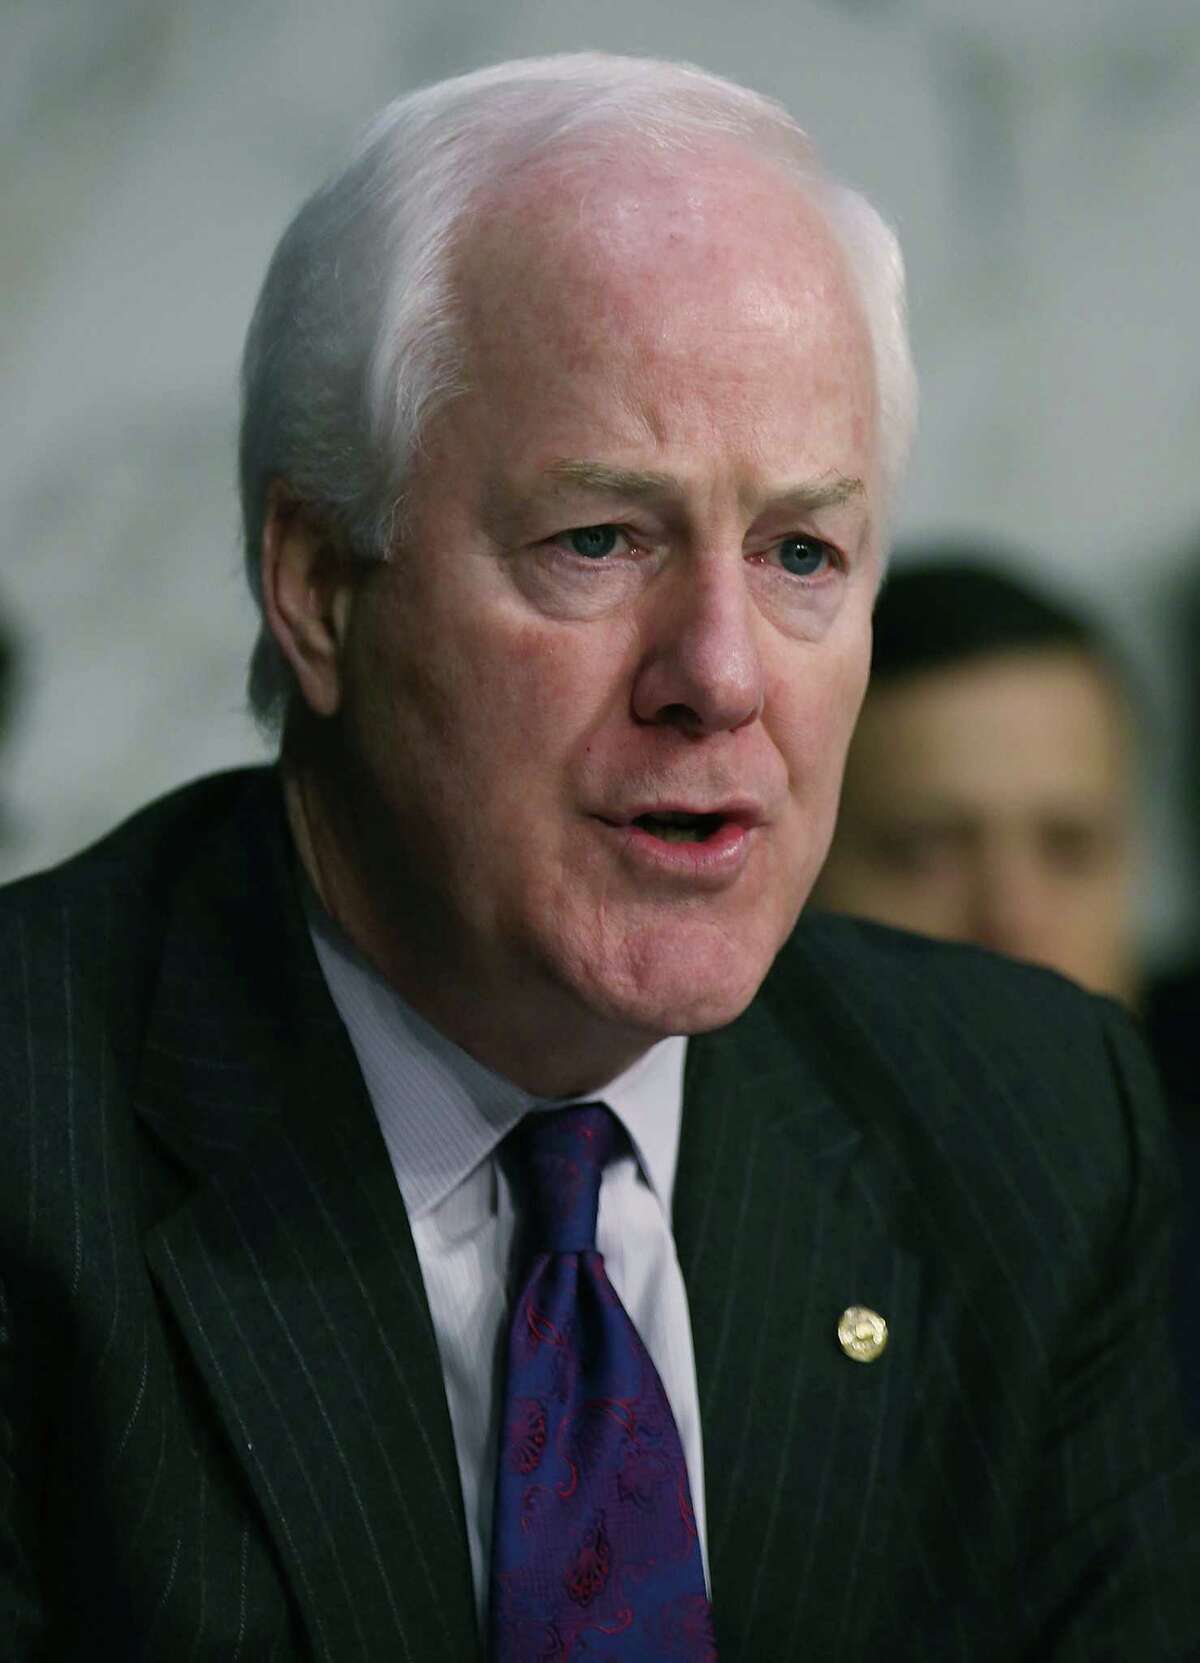 Sen. John Cornyn, R-Texas, is concerned with the “consequences” of an attack on Syria.